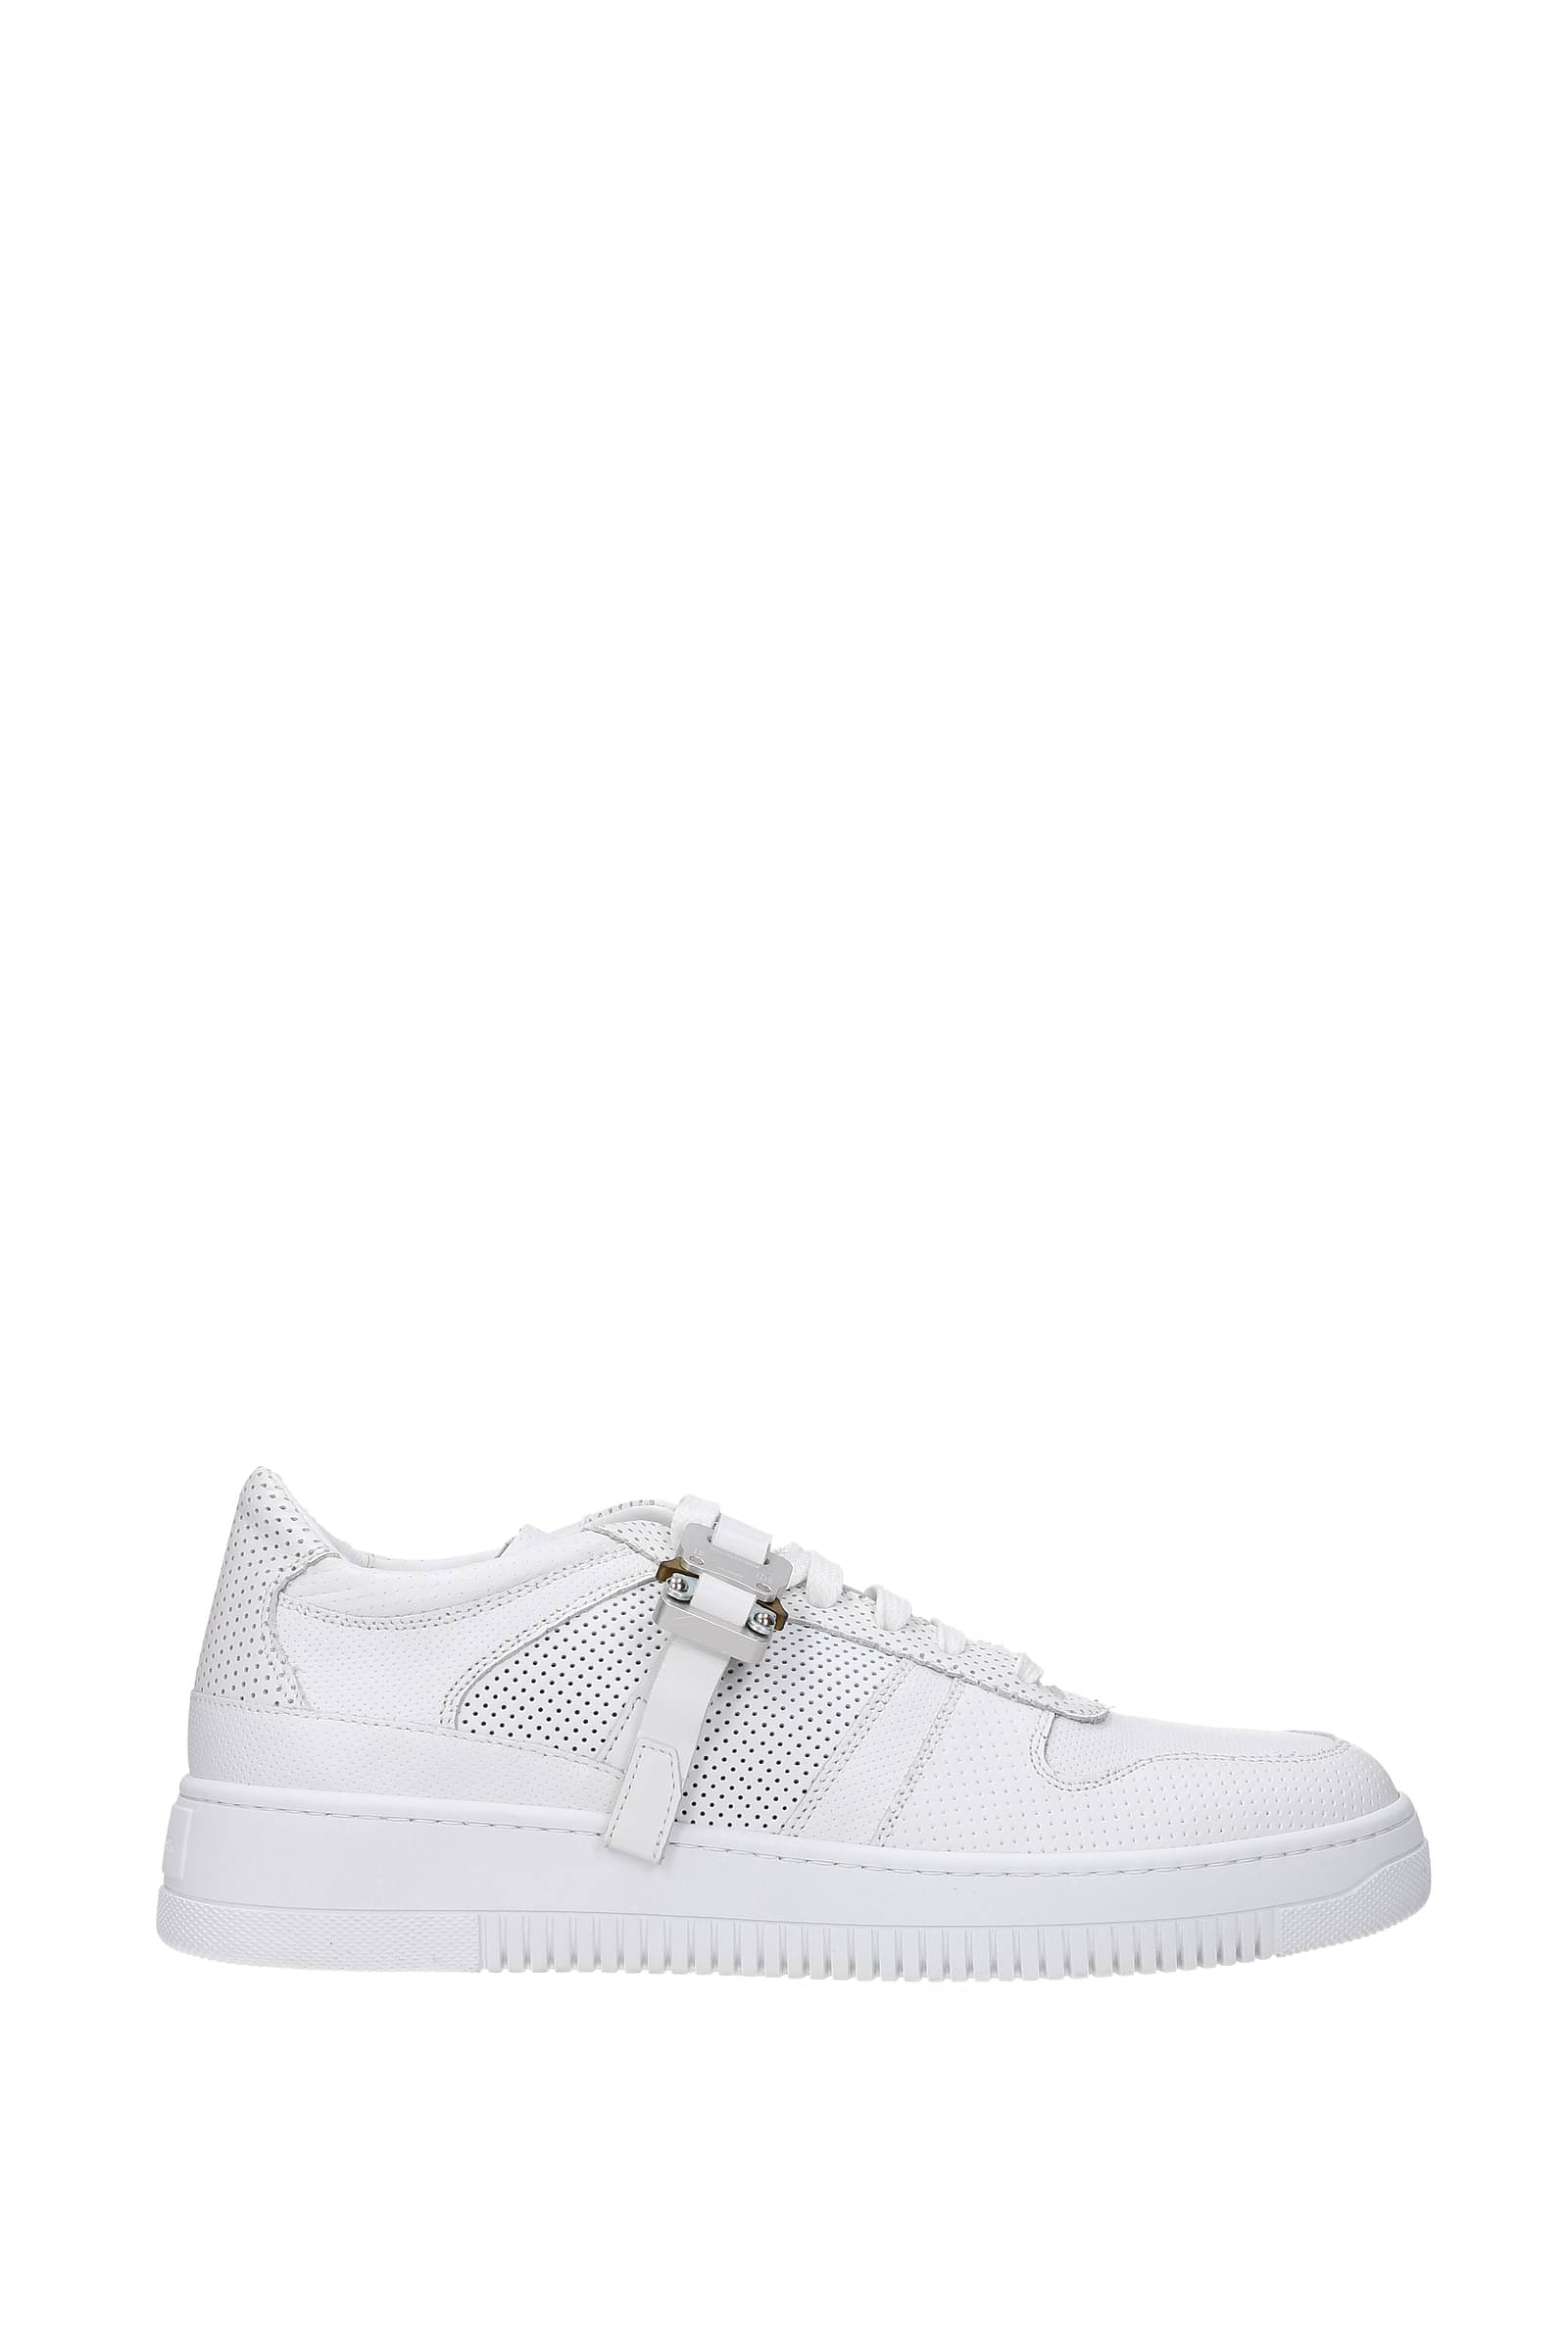 unde1017 ALYX 9SM Leather Low Top Sneaker